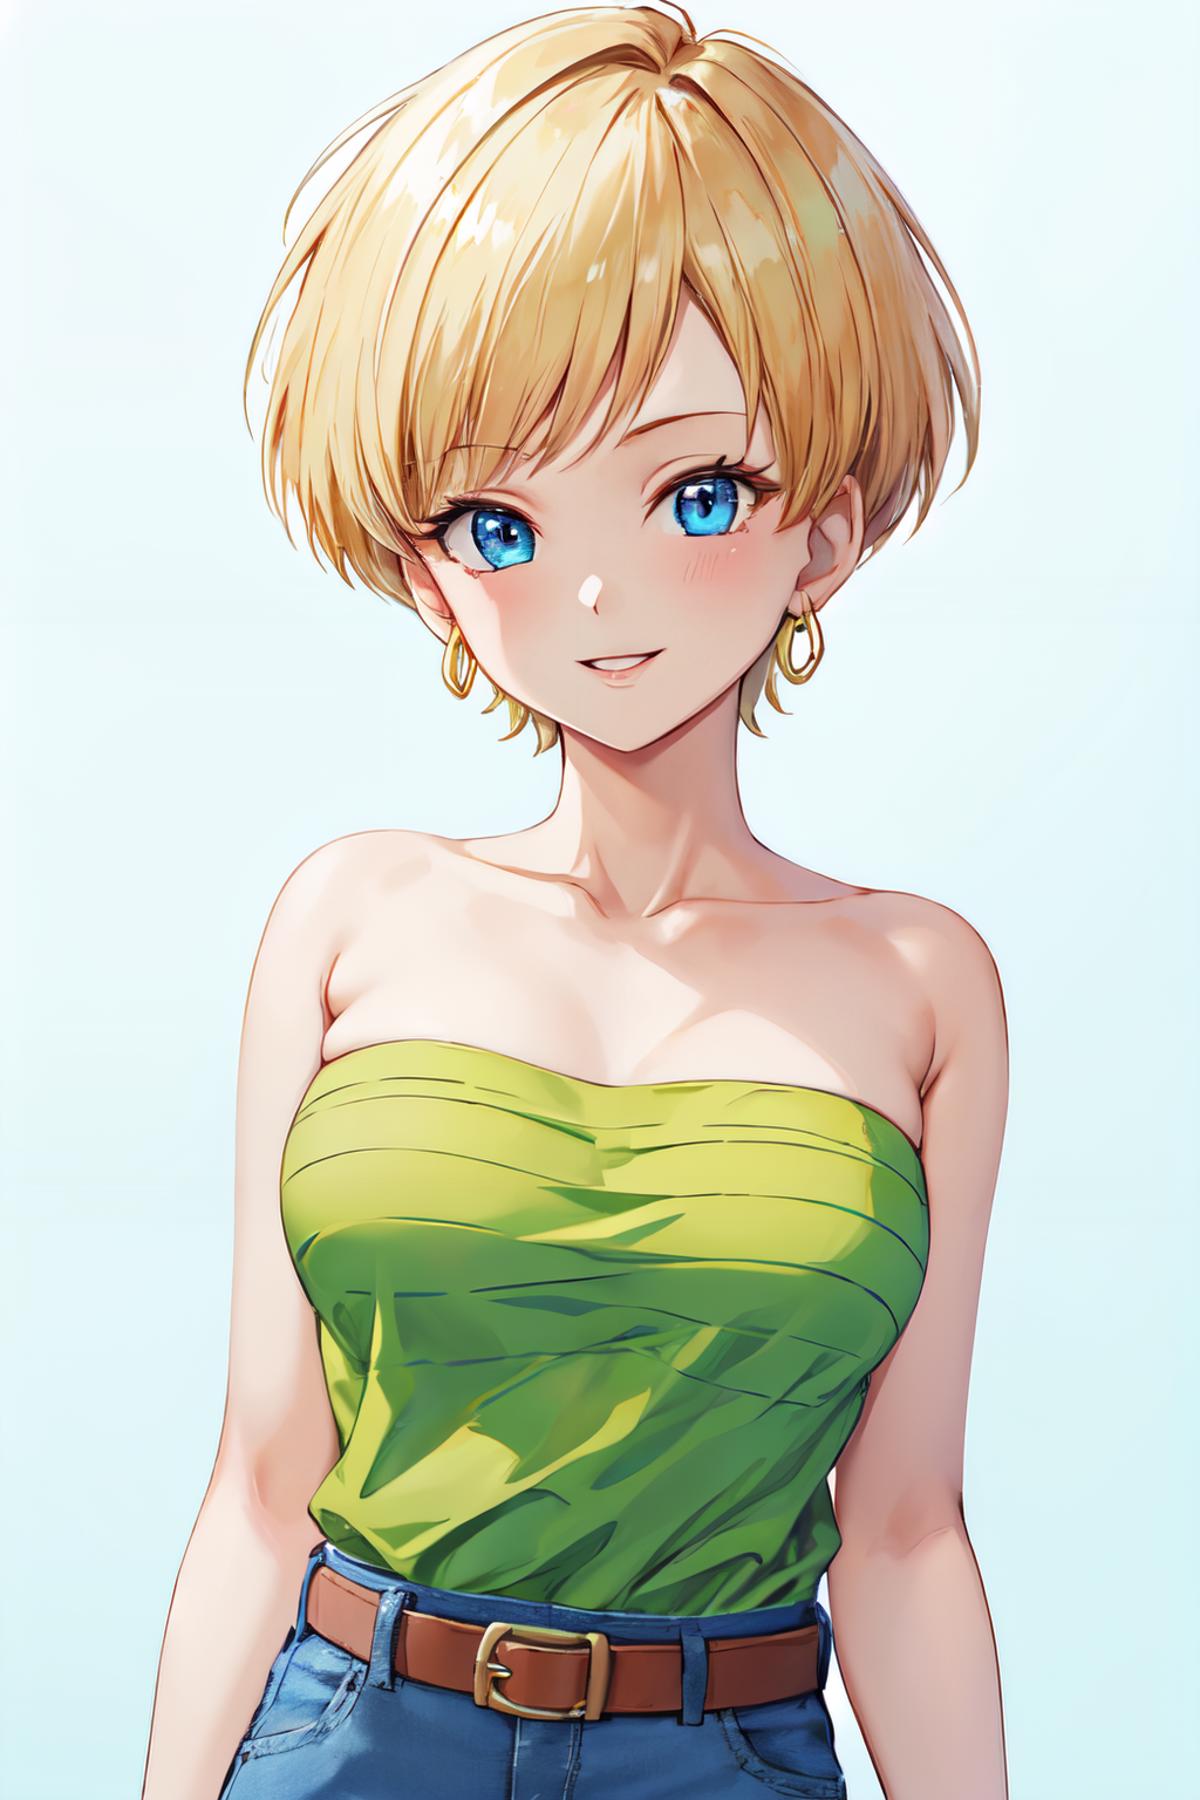 A cartoon image of a woman wearing a green dress with blue eyes and earrings.